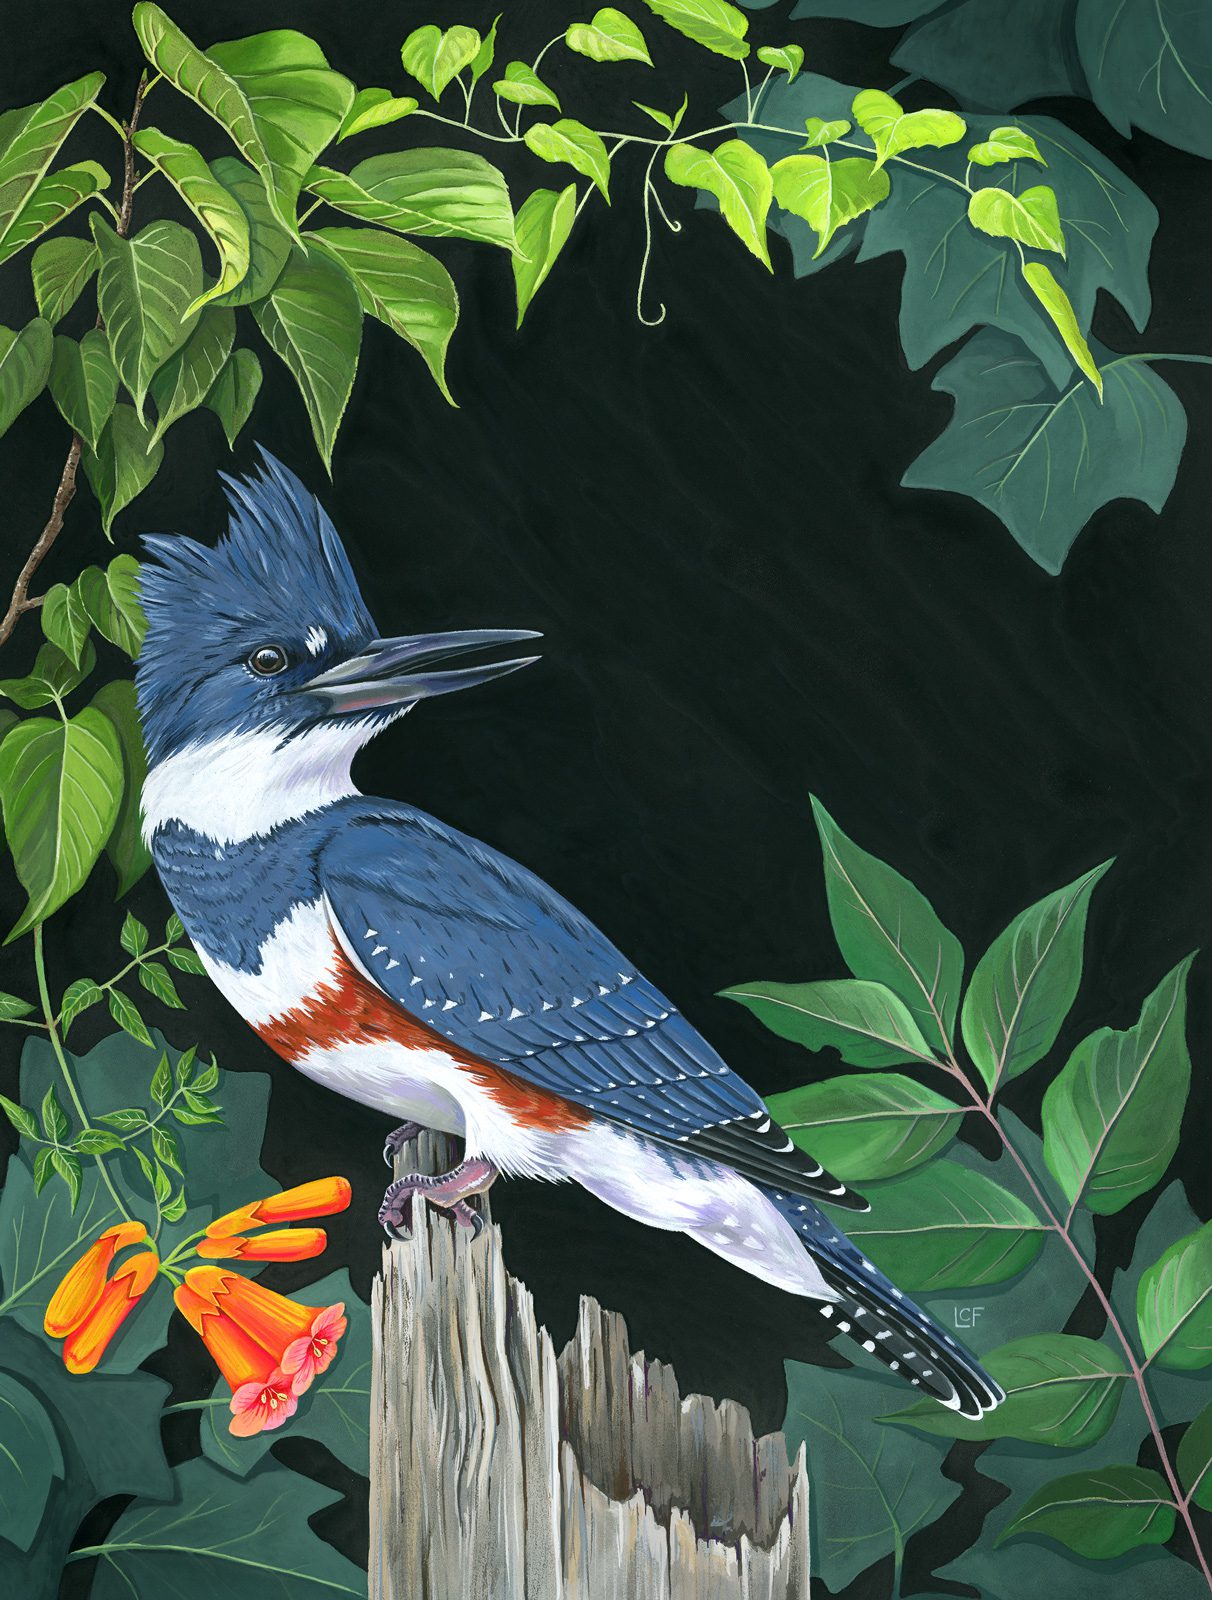 An illustration of a blue and white bird with a rusty red chest stripe, long, pointed bill and head crest.